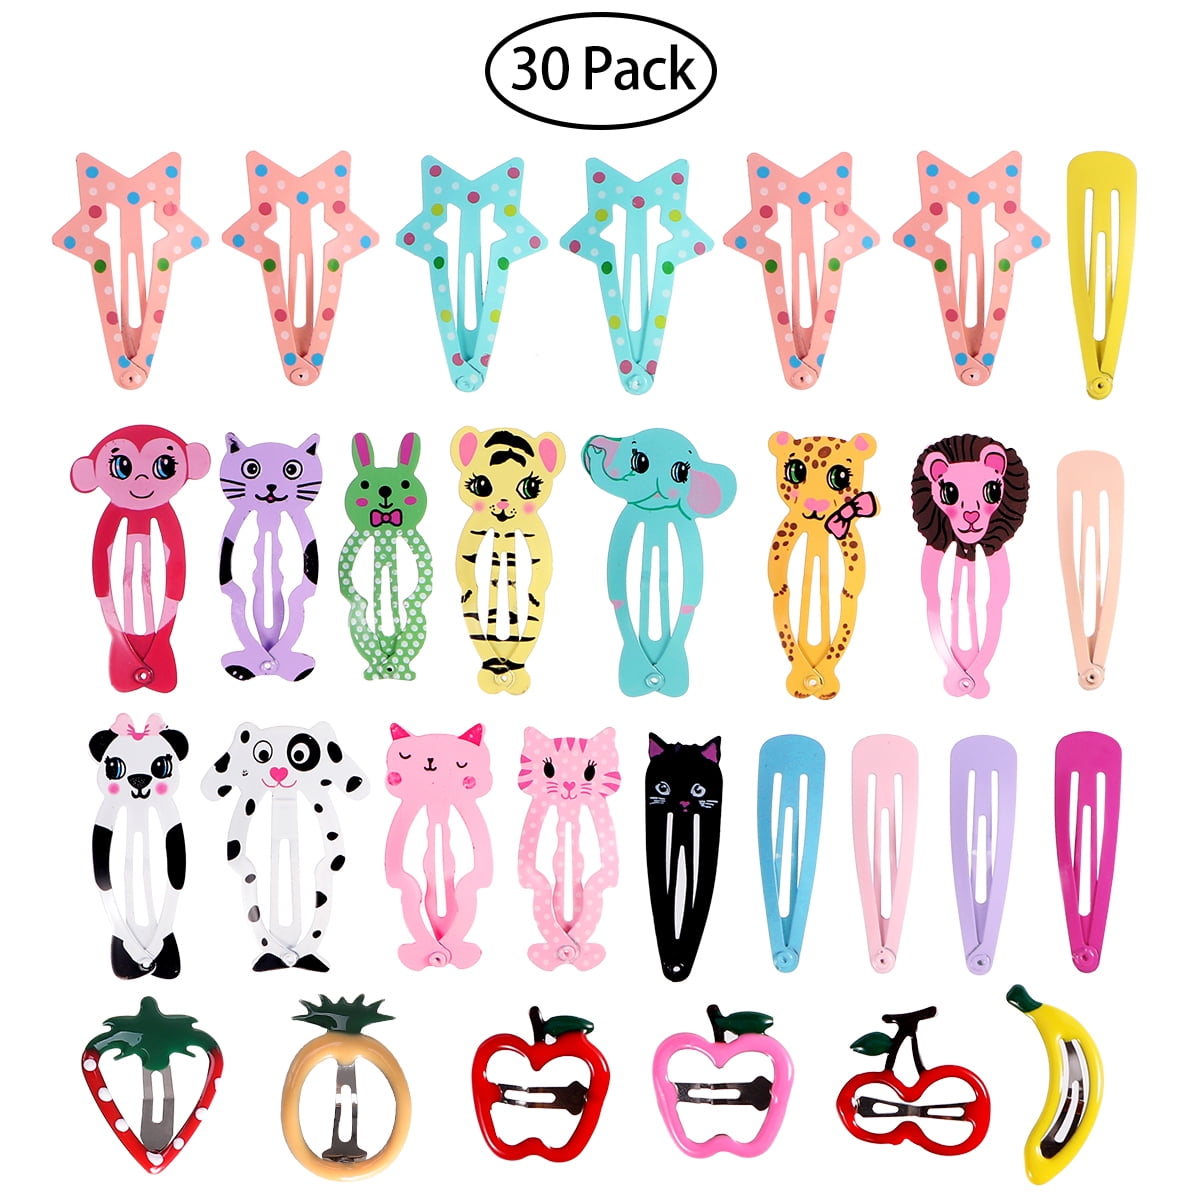 32 Pcs Hair Clips Lovely Metal Cute Snap Barrettes Hairpins for Teens Toddlers 